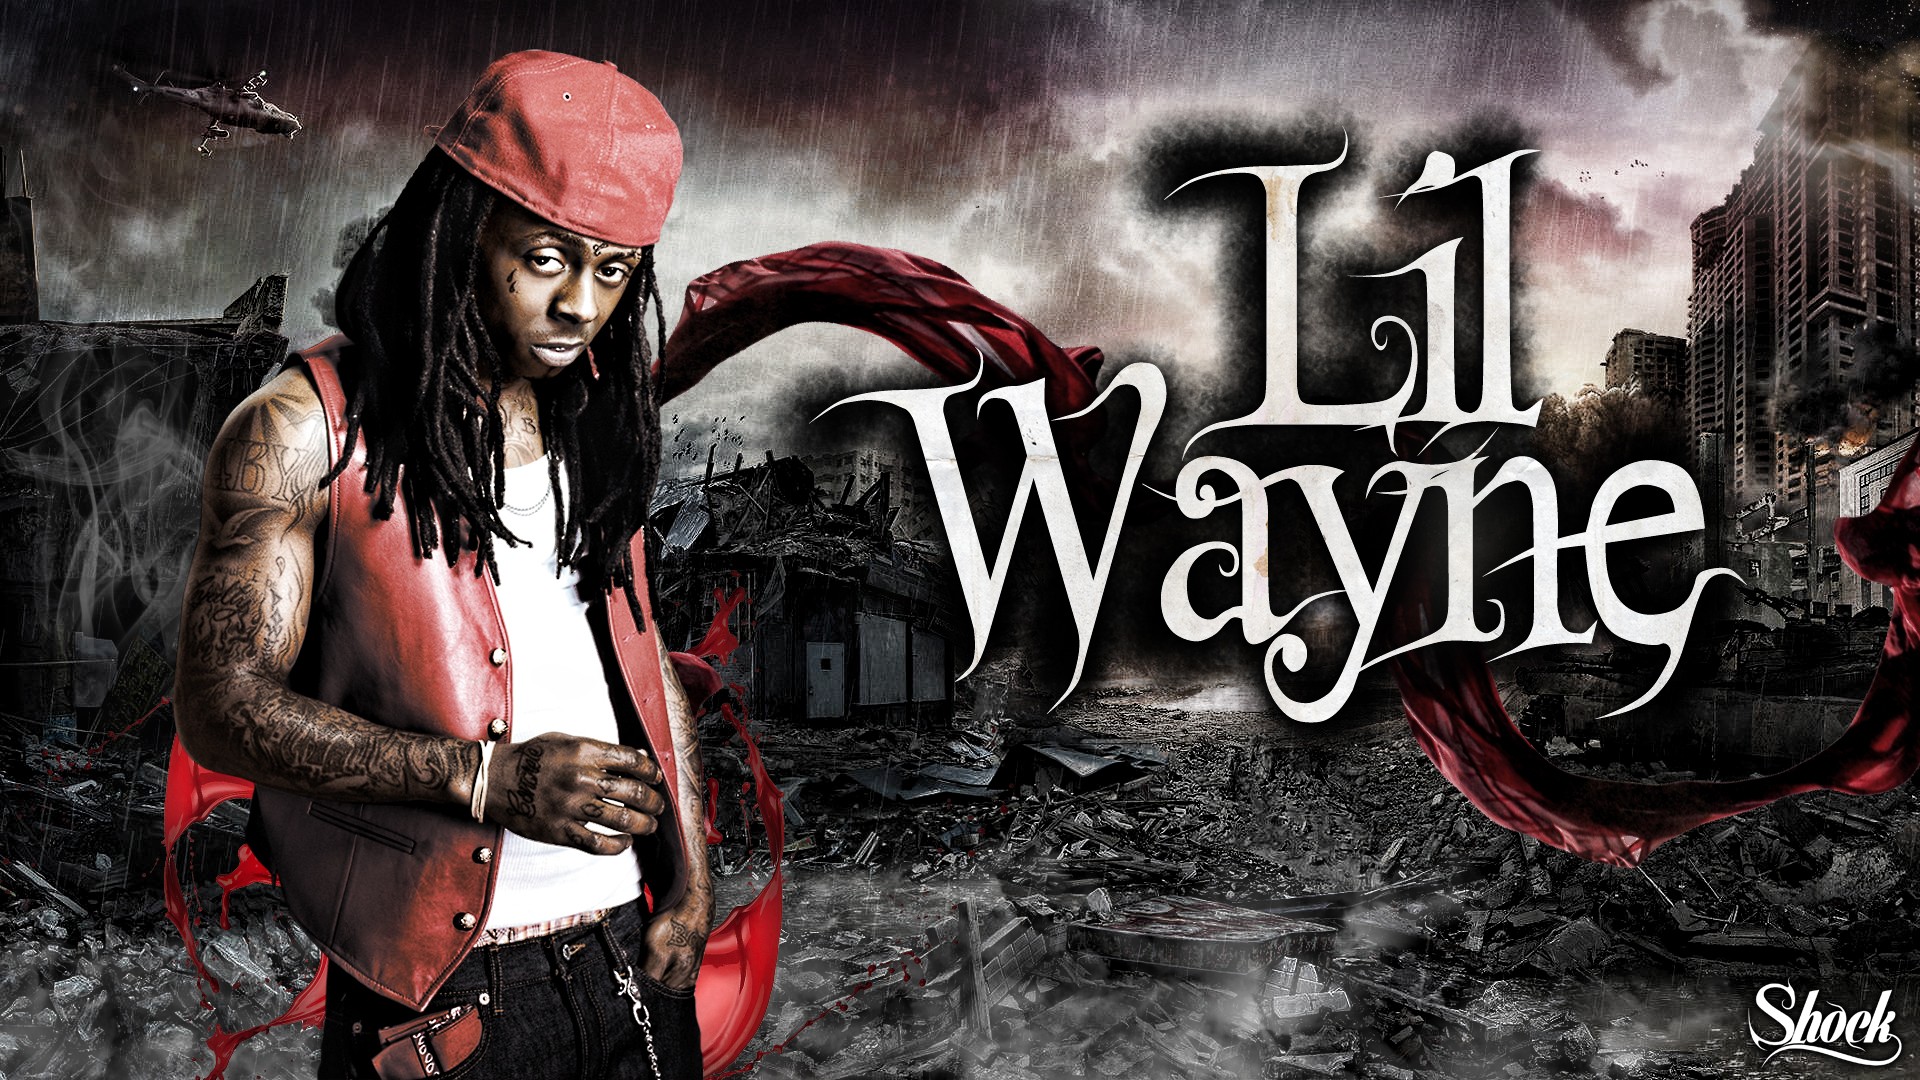 Download Lil Wayne HD 4 background for your phone iPhone android 1920x1080